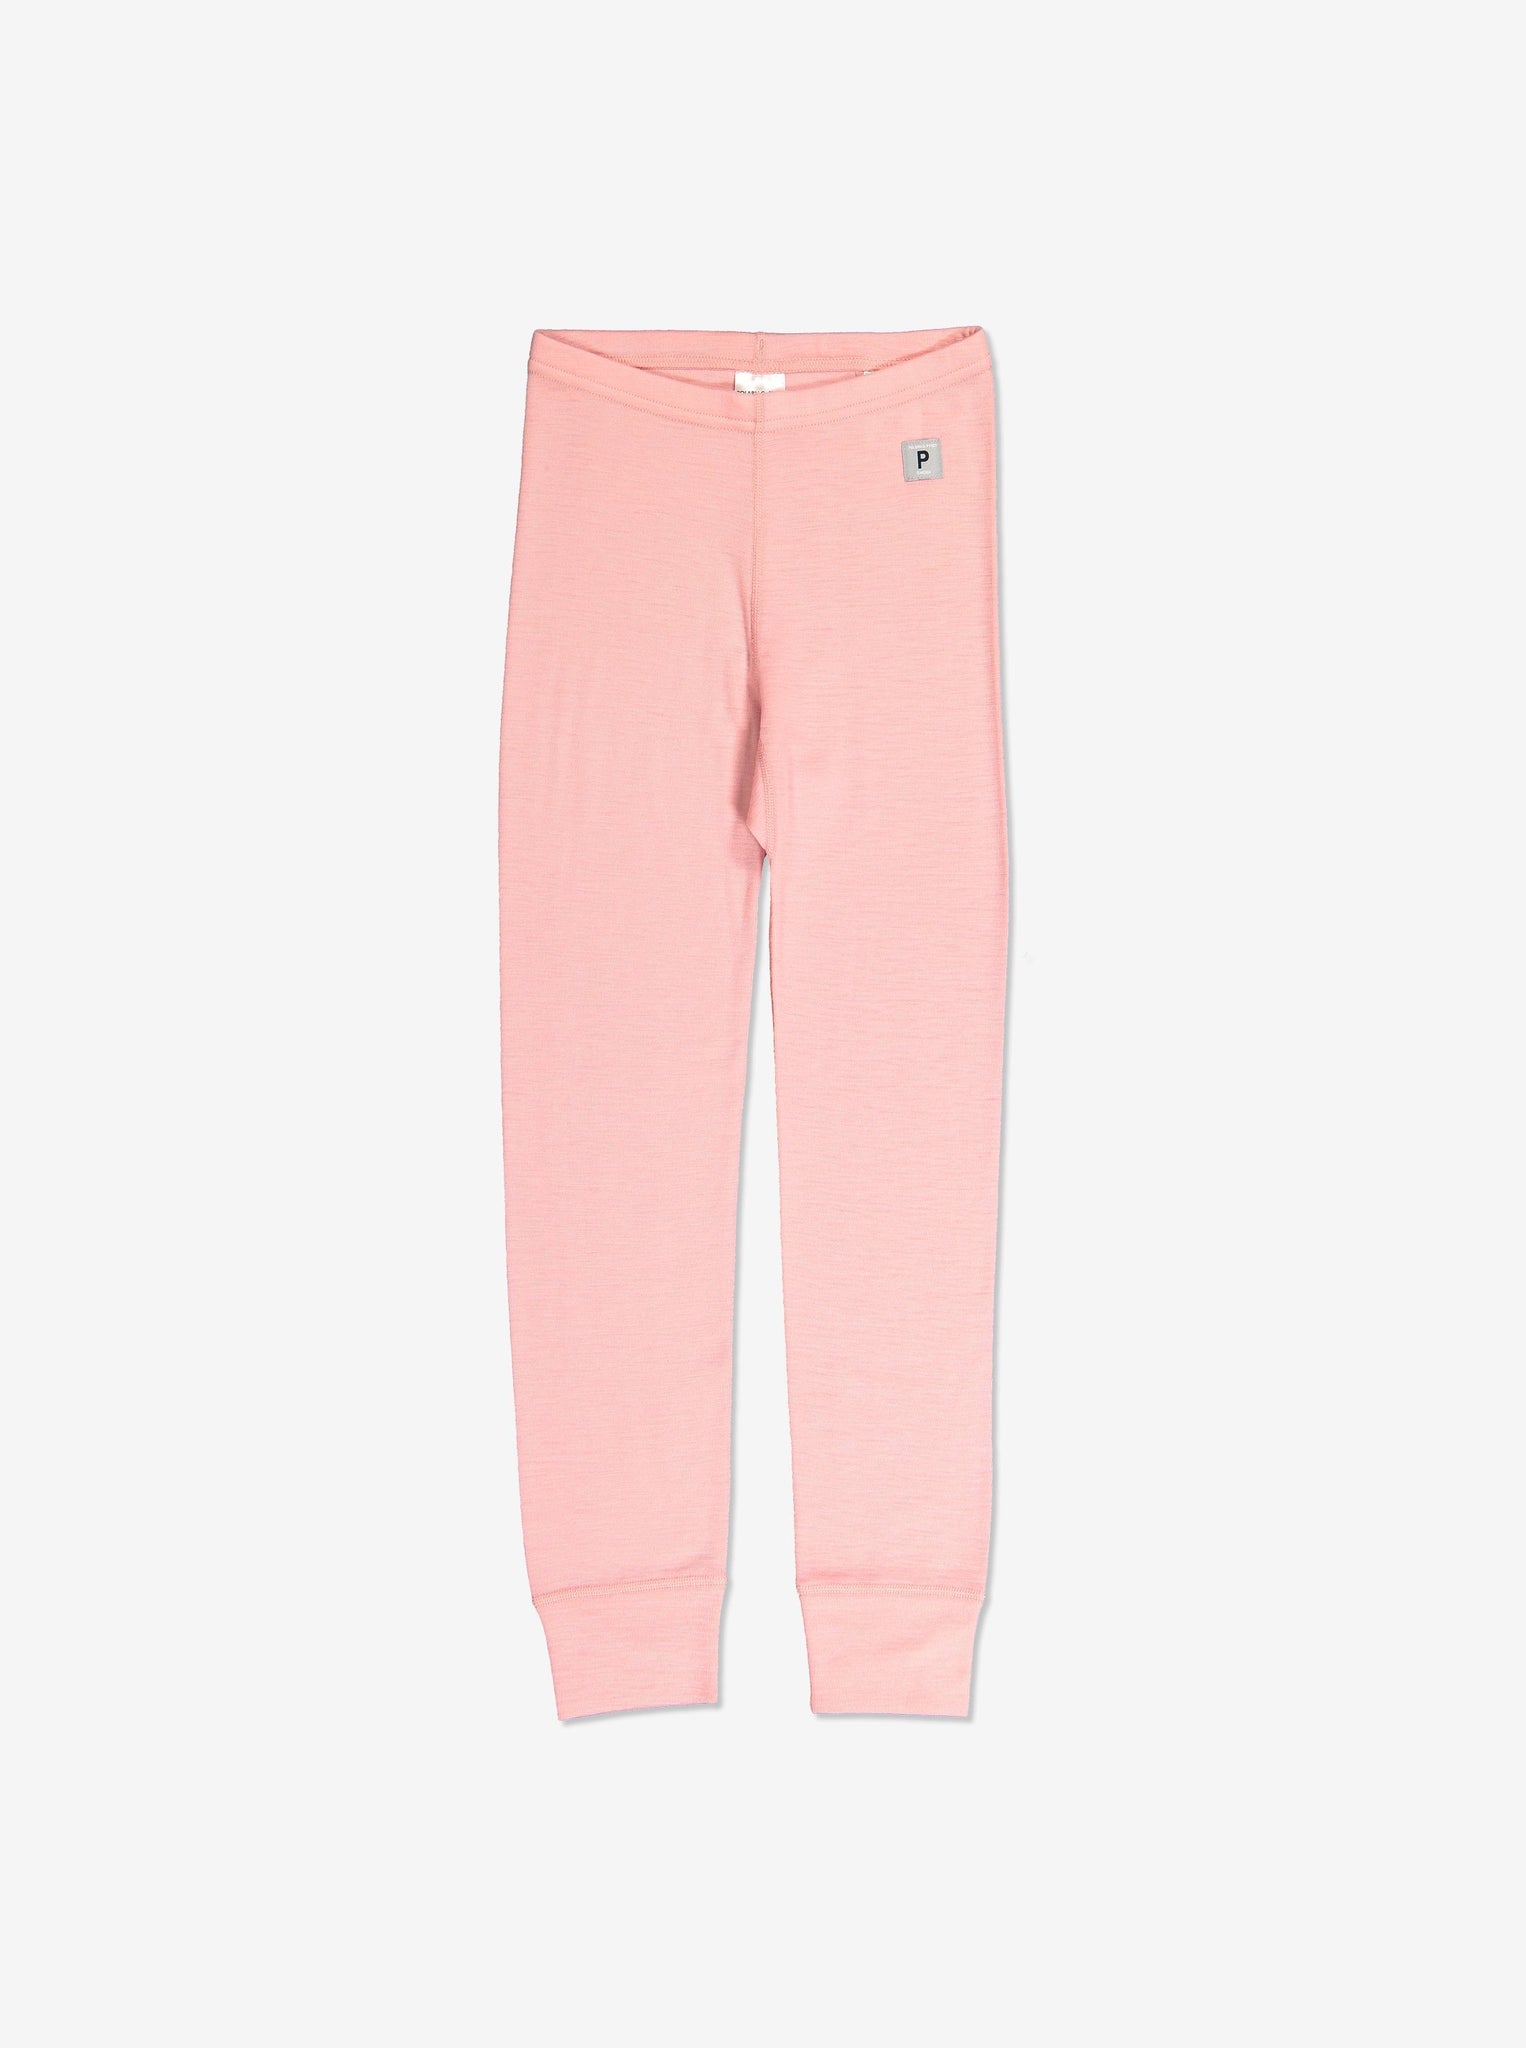 Thermal long johns in pink for 0-12 year old girls. Made with a cosy and super soft merino wool